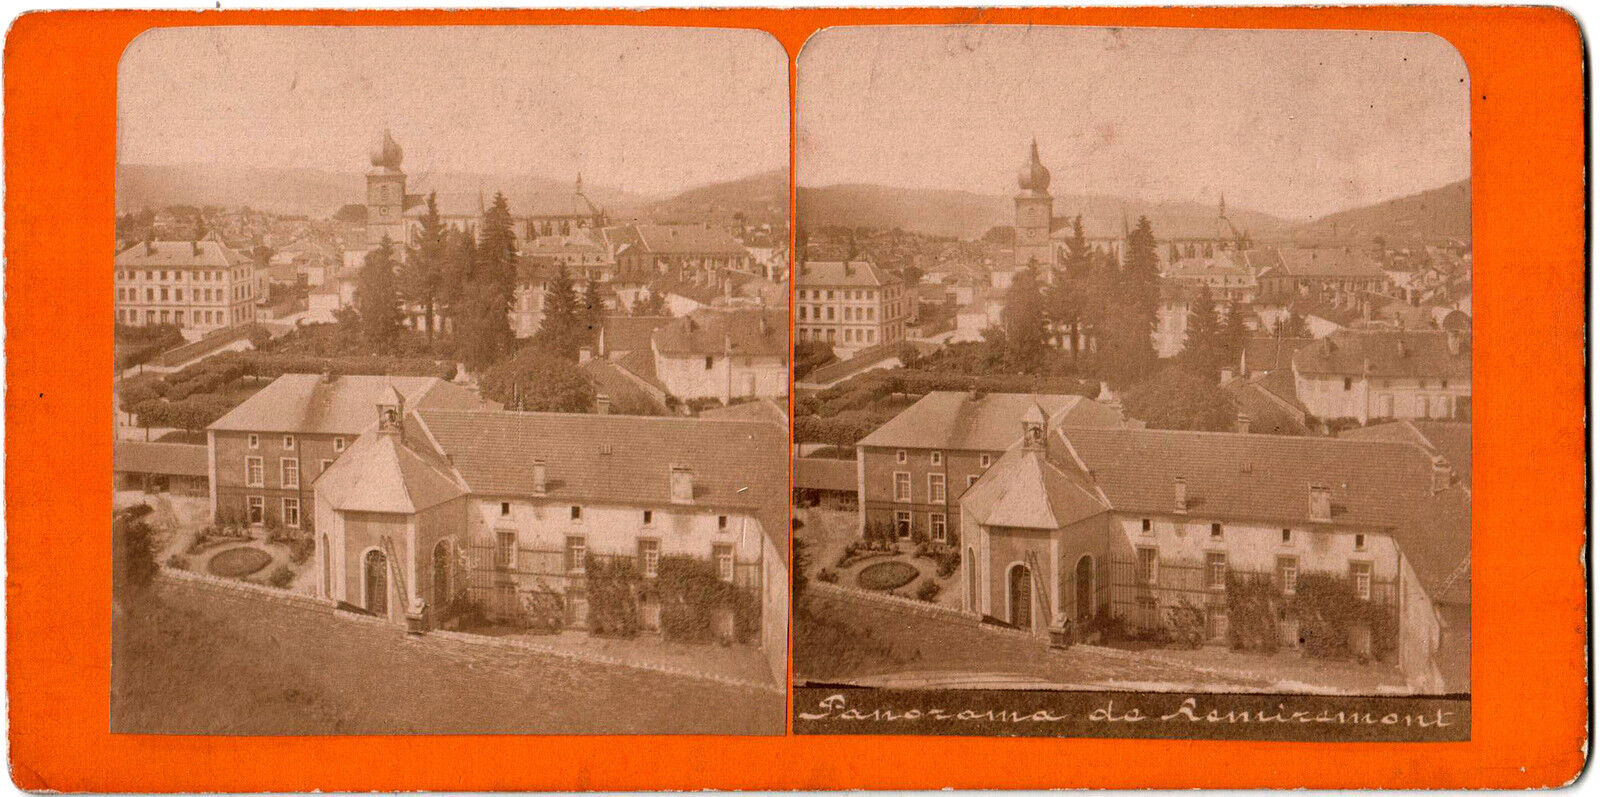 Remiremont.Lorraine.Vosges.Grand Est.Panorama.Albuminated Stereo Photo.Stereoview.